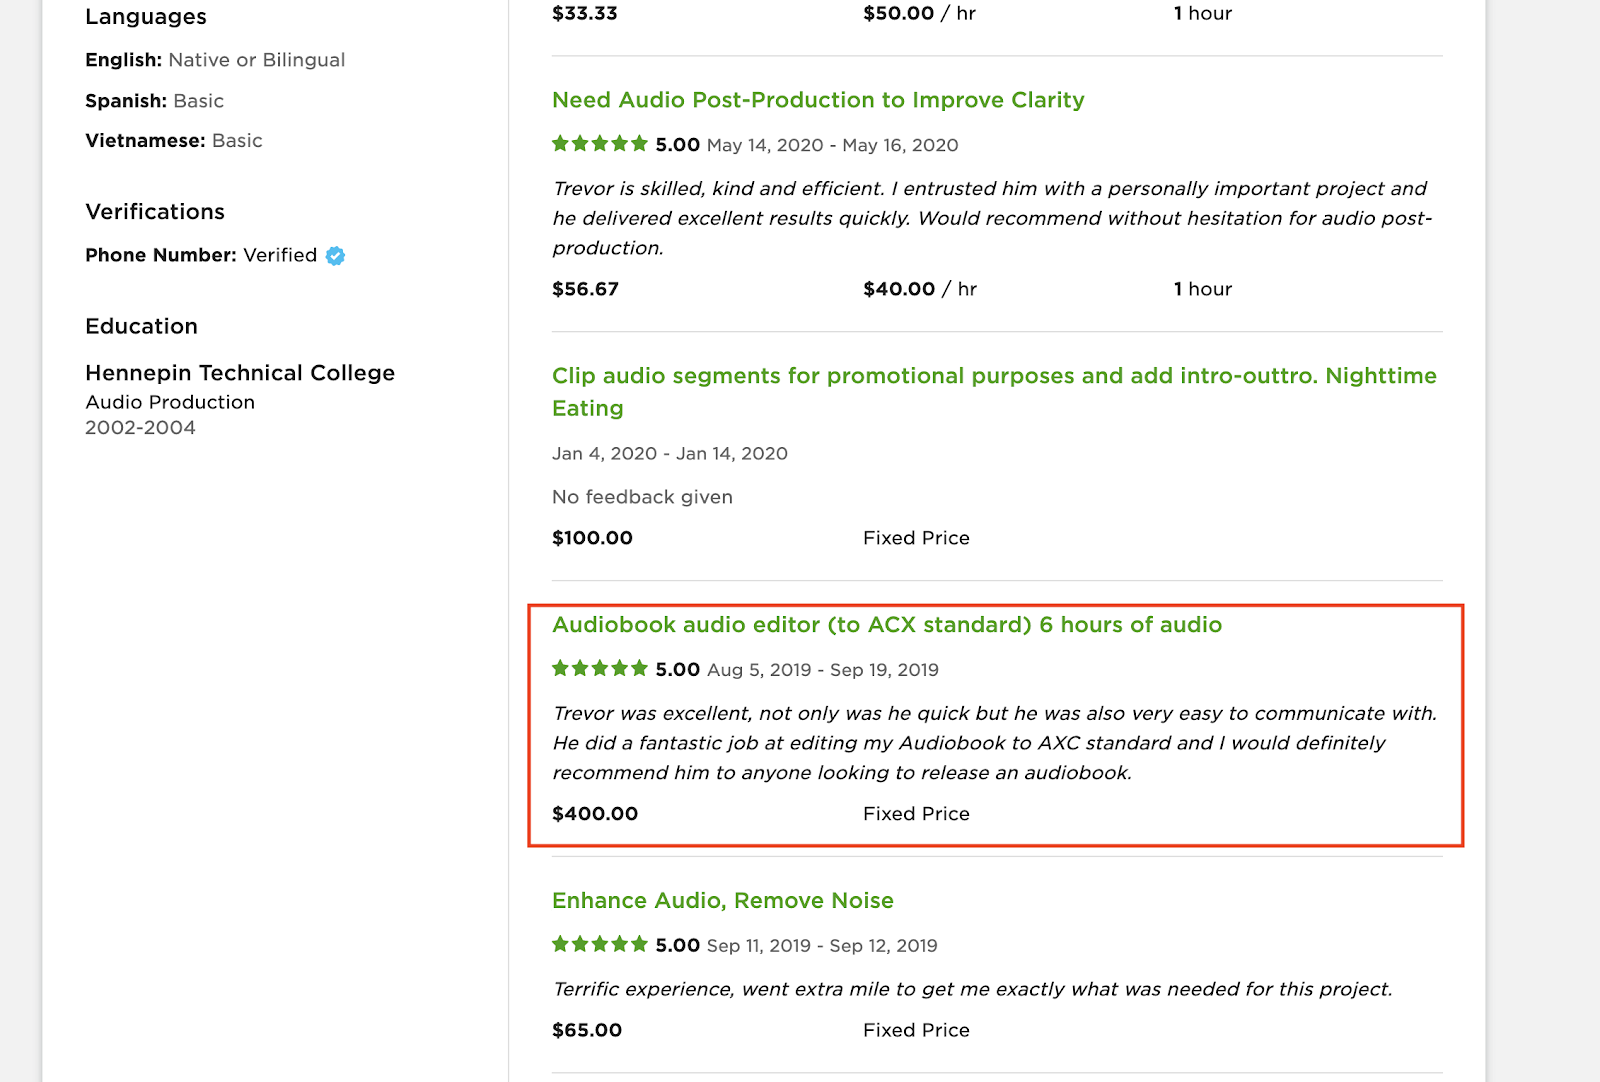 Reviews, ratings, and rates for an audiobook producer on UpWork